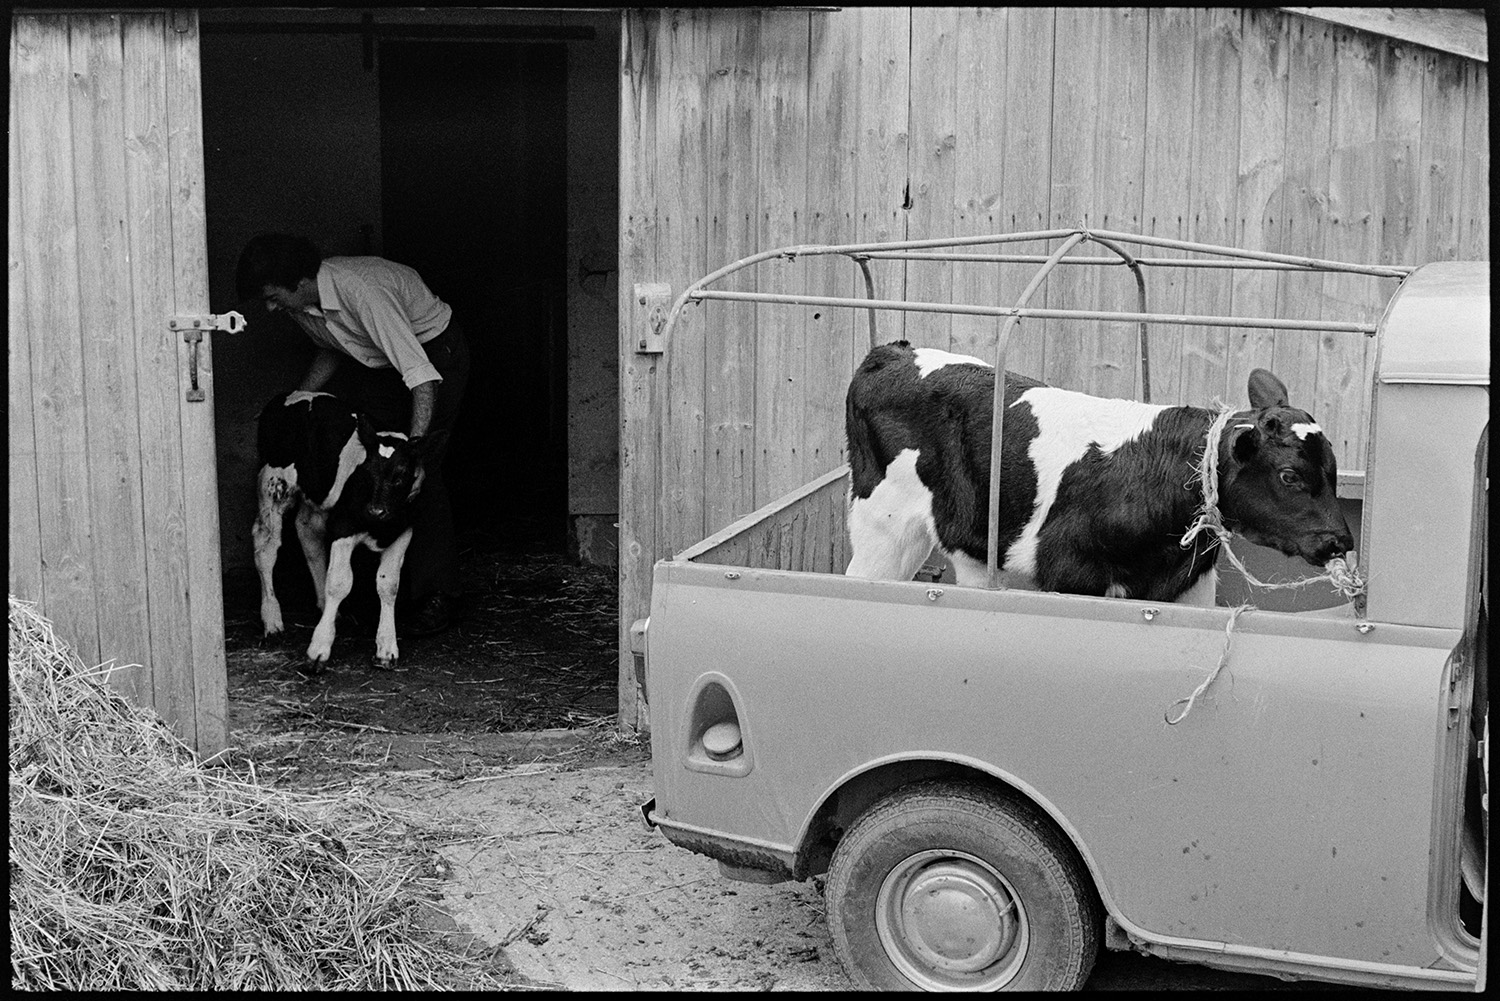 Taking calves to market in pickup van, calves in pens and Auctioneer. 
[David or Graham Ward loading a calf onto a pick up truck at Parsonage, Iddesleigh, to be taken to market. One calf is already tethered in the truck.]